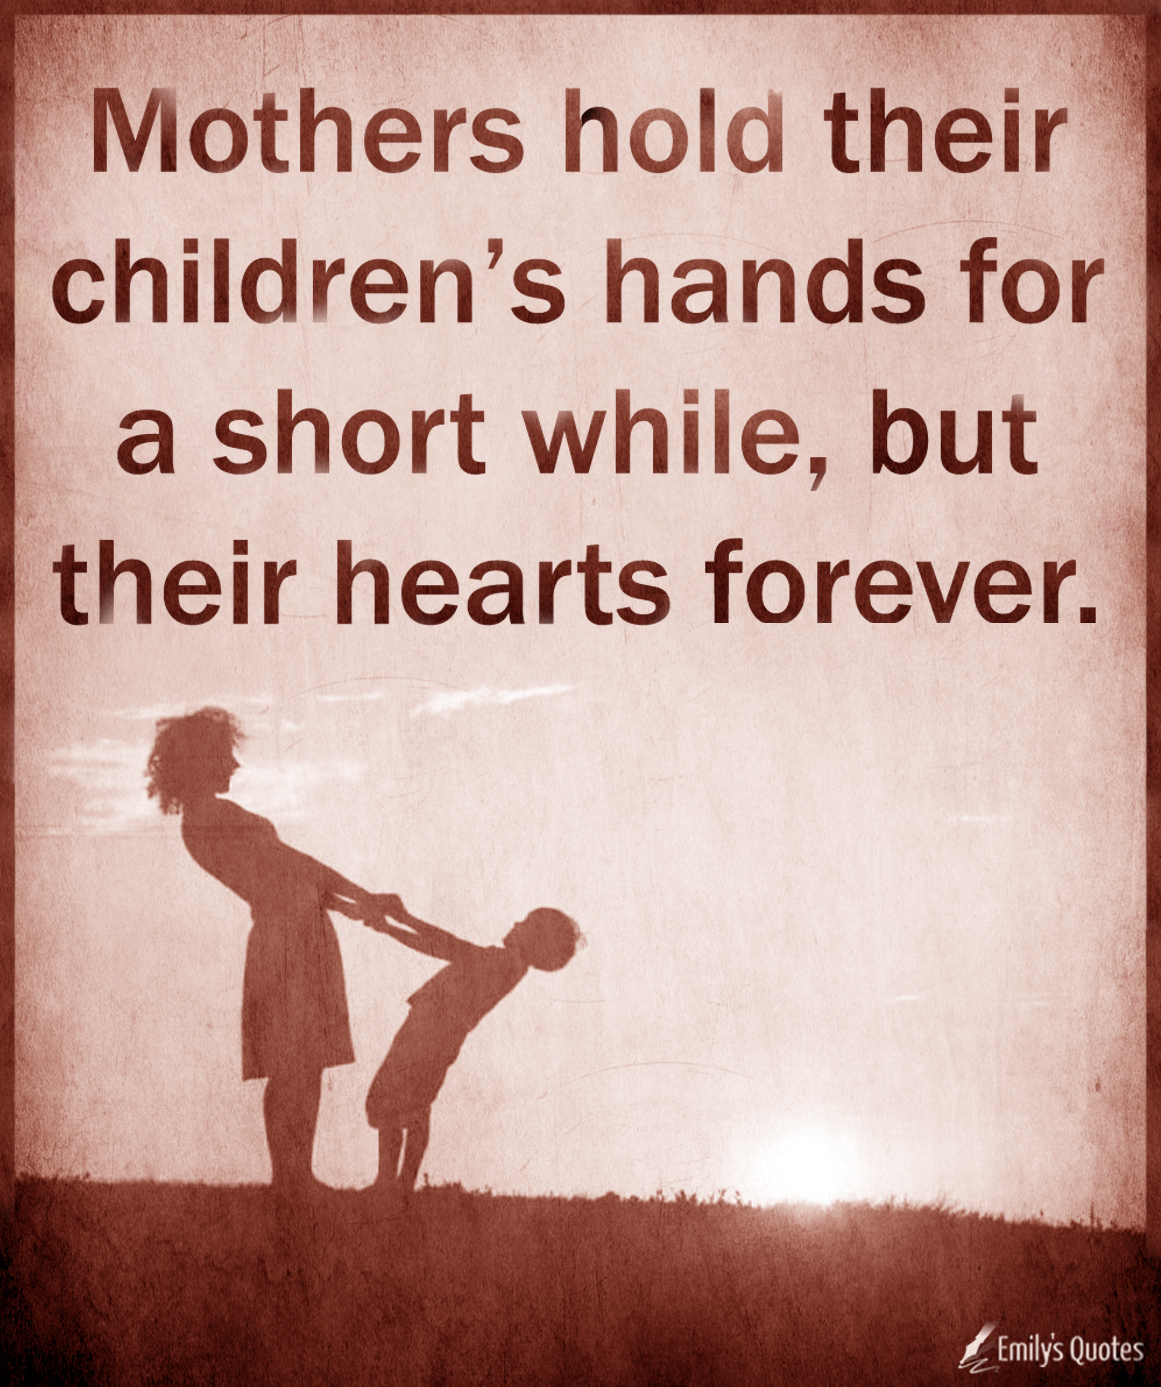 Mothers hold their children’s hands for a short while, but their hearts